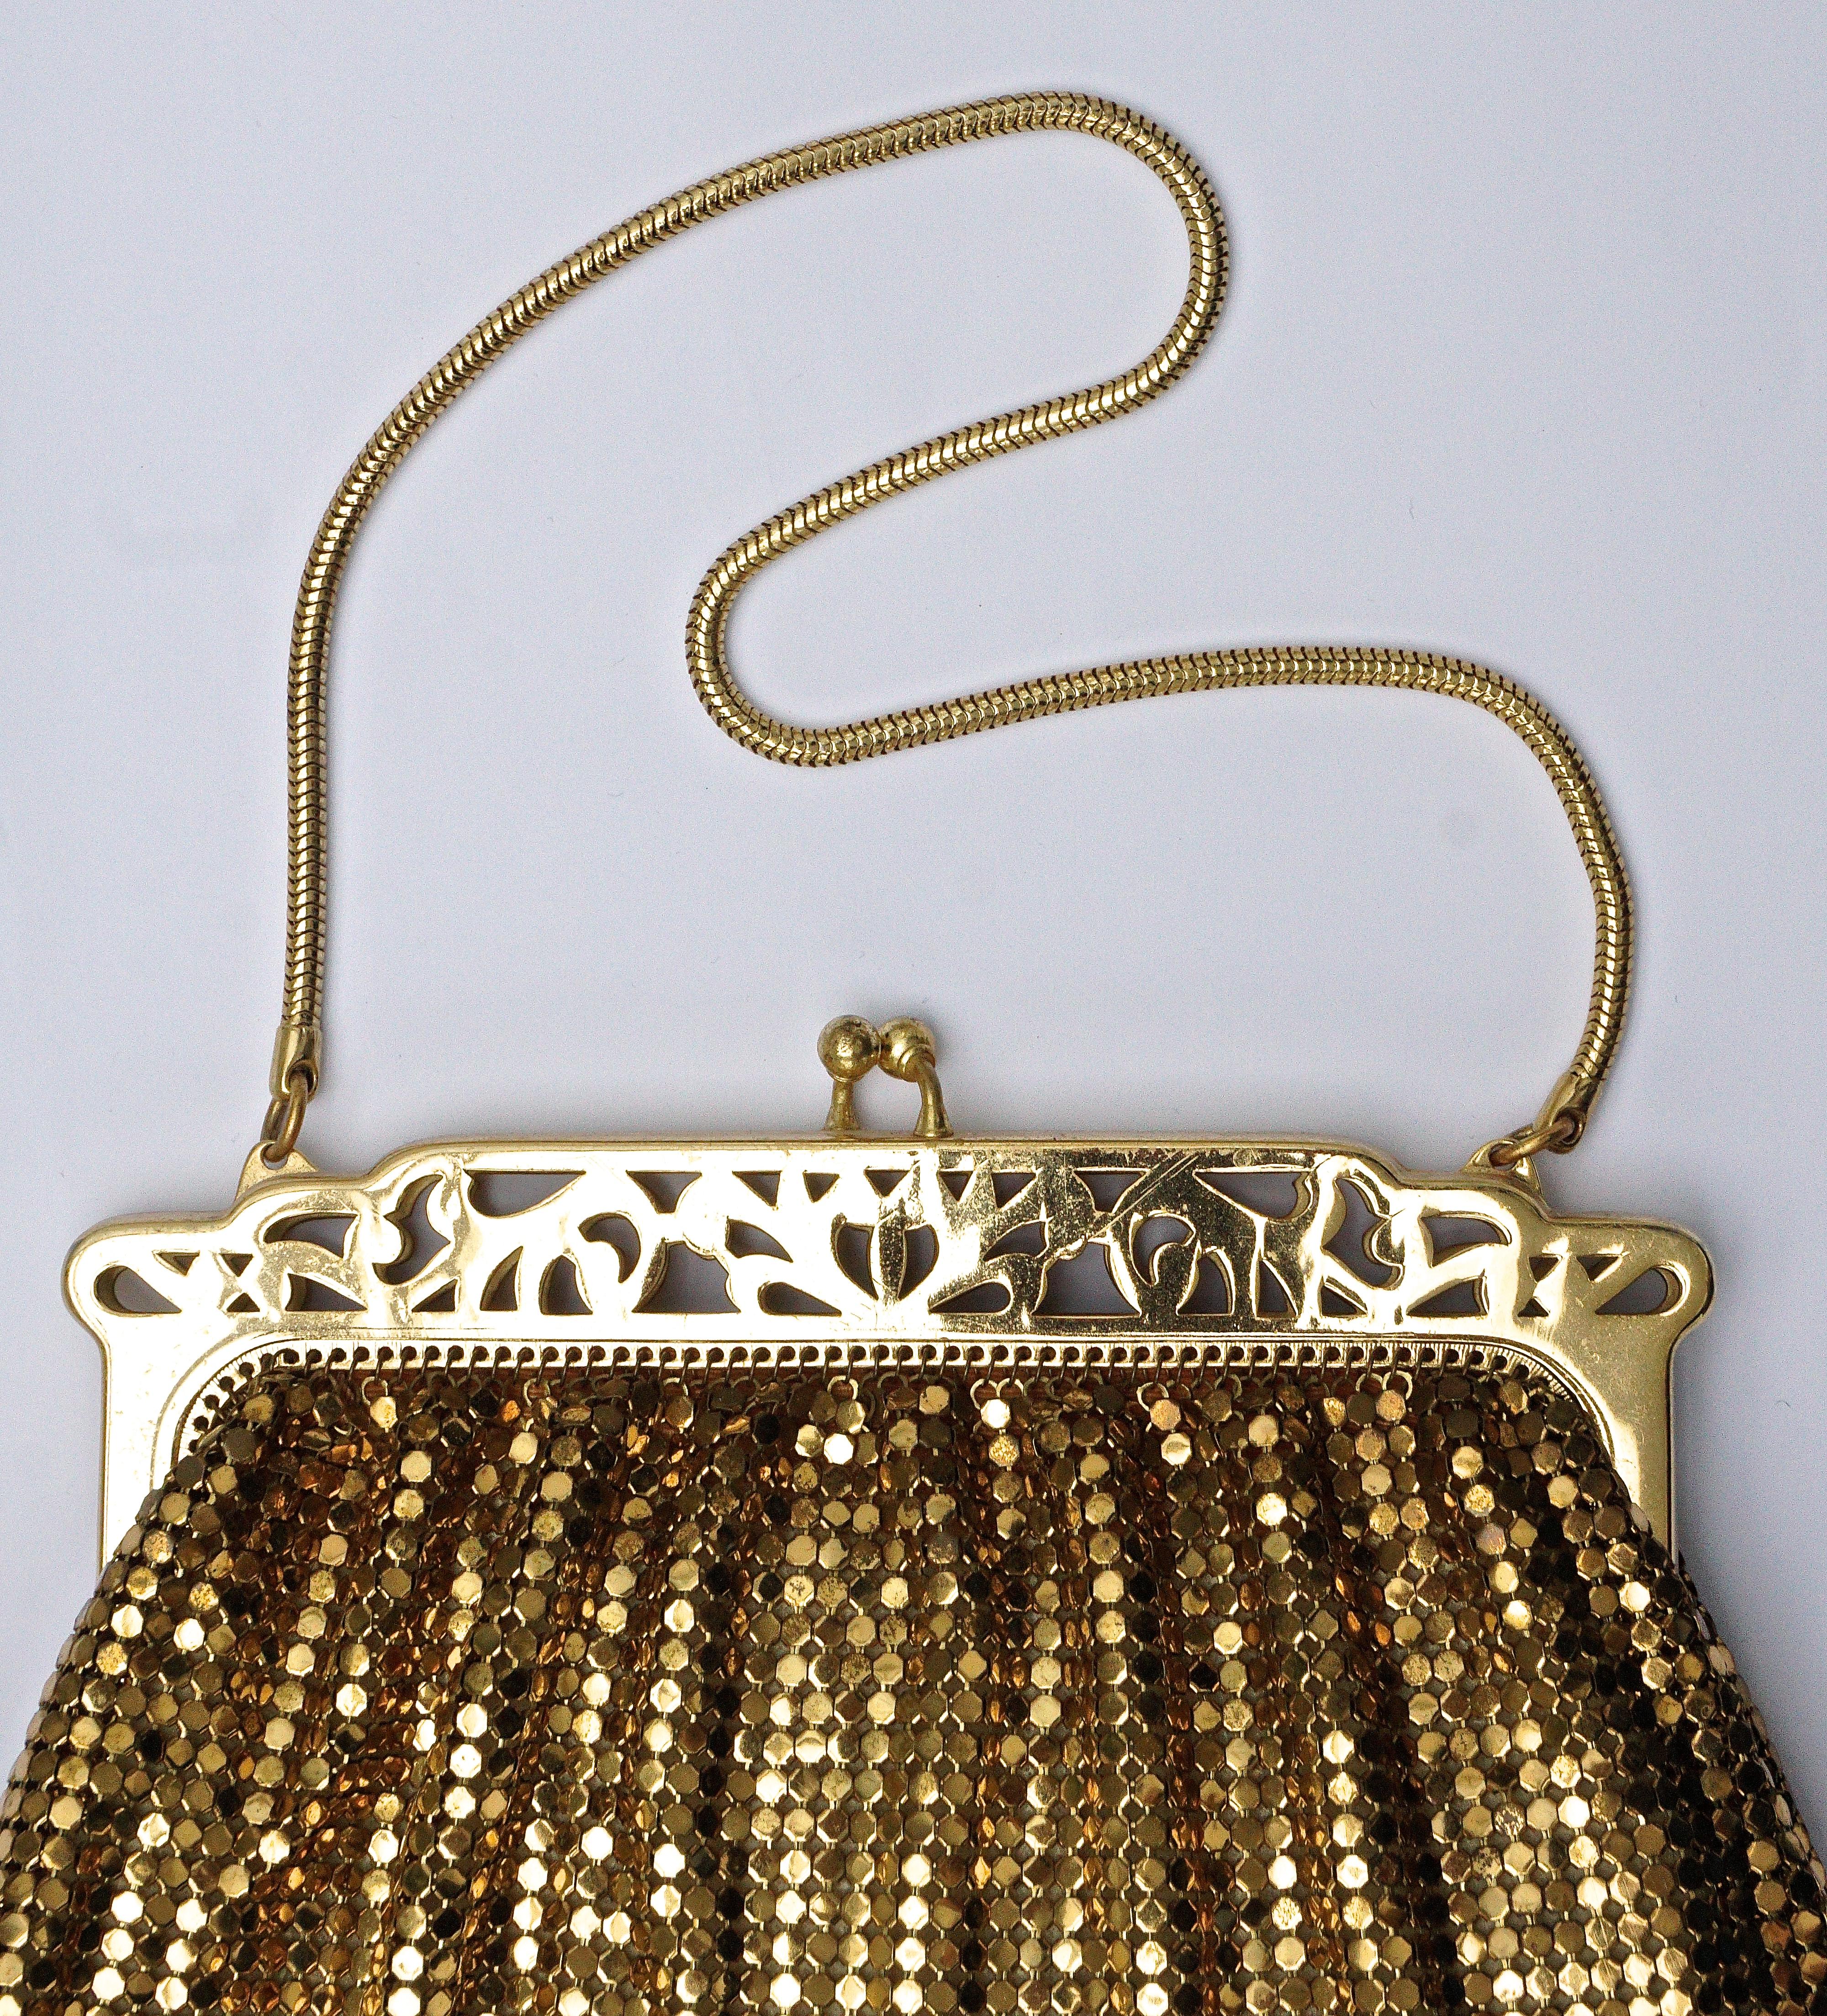 Beautiful vintage gold mesh bag by Whiting & Davis featuring a lovely cut-out frame, and snake chain handle.
Length 14cm / 5 1/2 inches, and the frame is width 13.3cm / 5.23 inches, the chain handle has a drop of 14.8cm / 5.8 inches. The peach